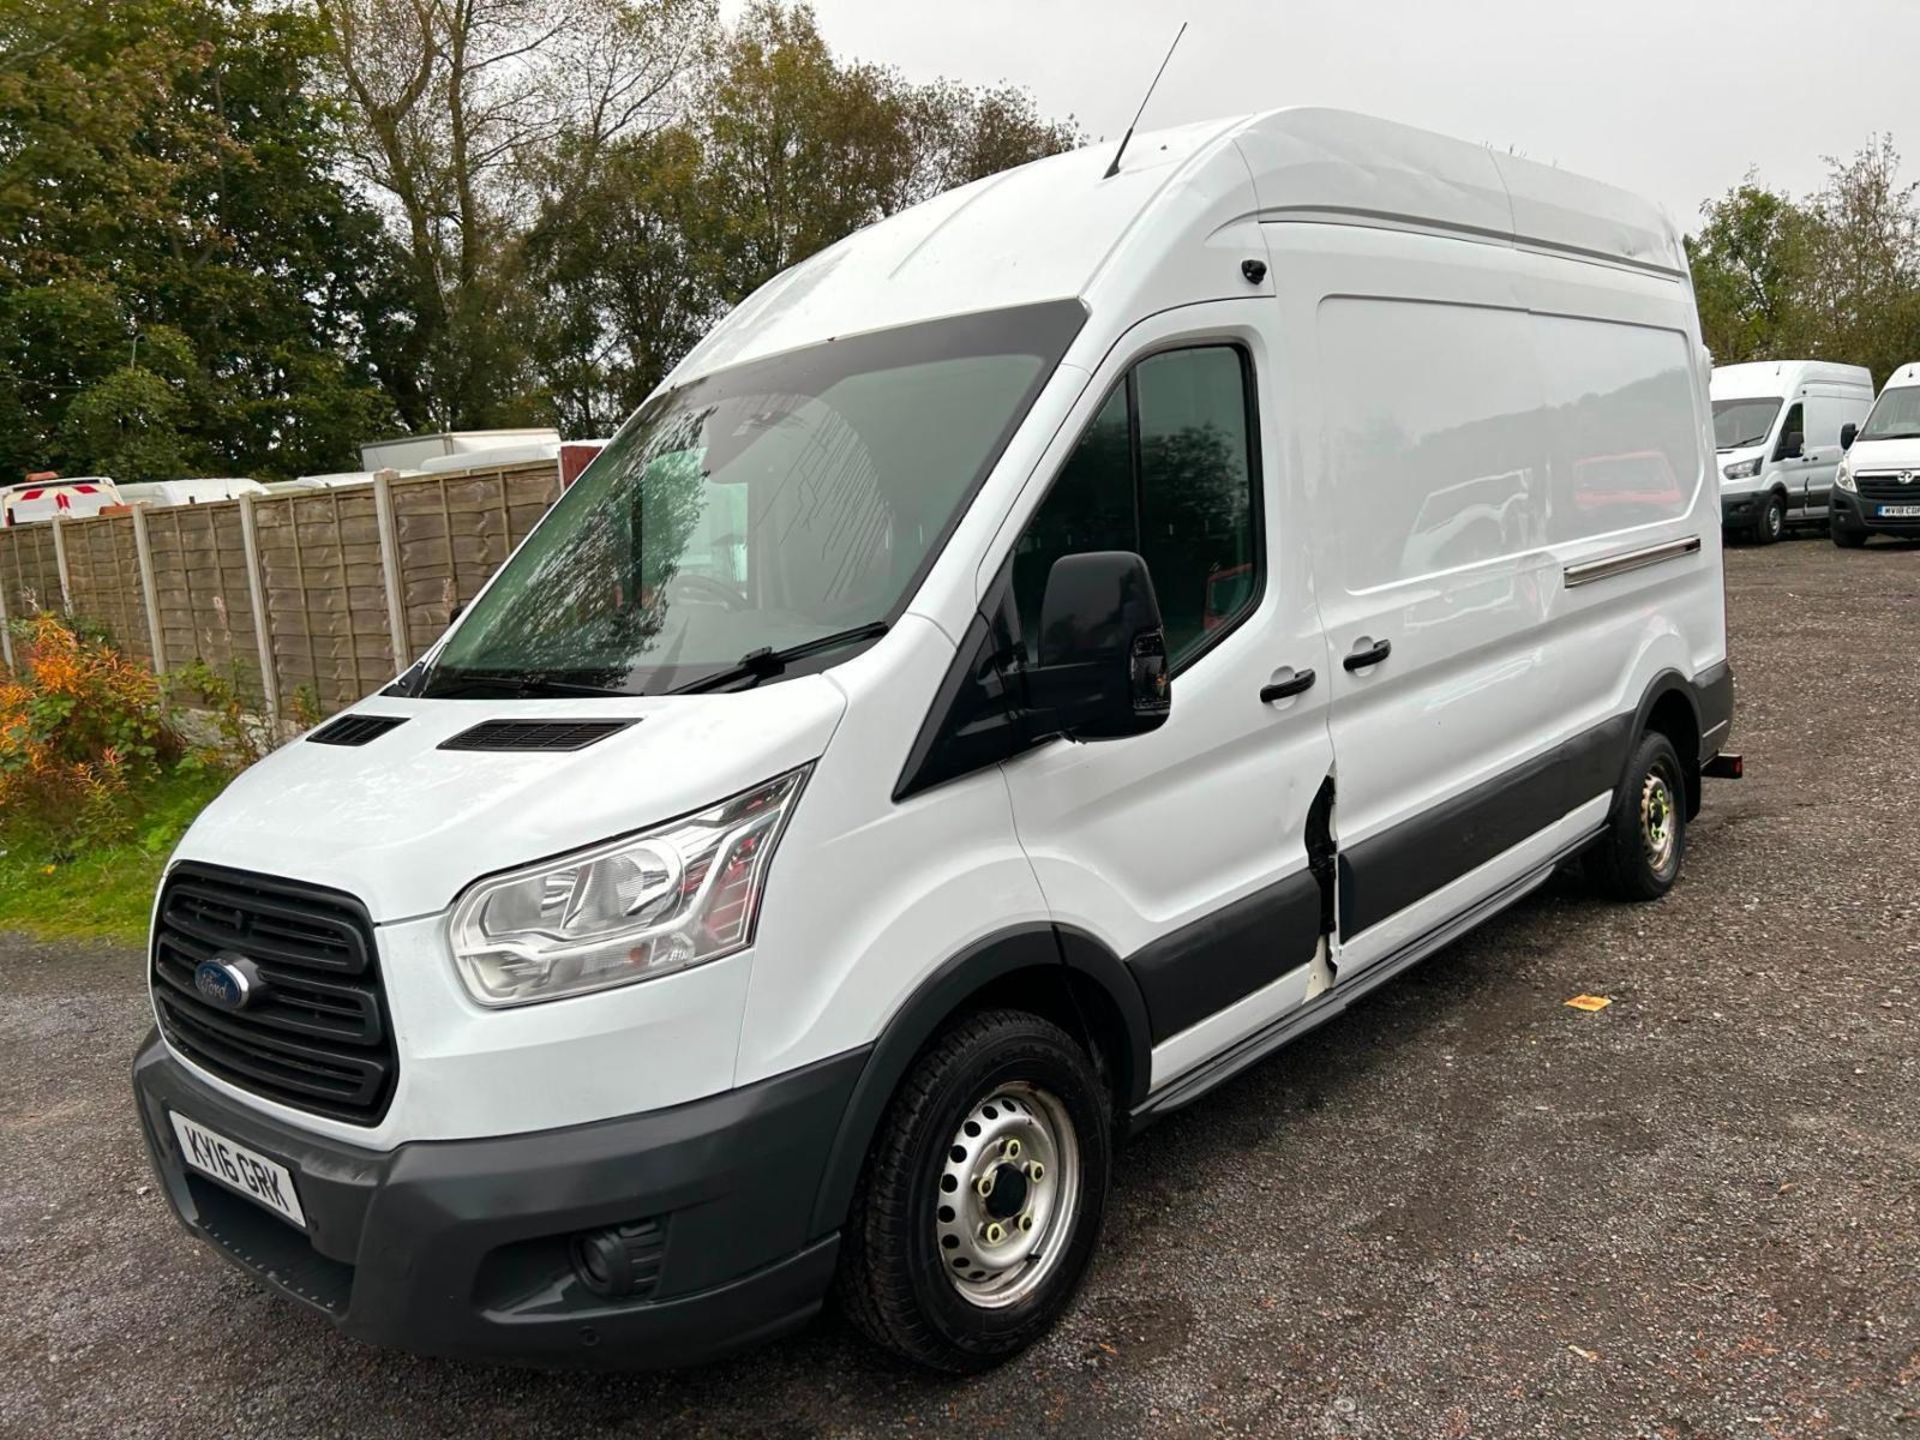 >>>SPECIAL CLEARANCE<<< RELIABLE WORKHORSE: 2016 FORD TRANSIT 2.2 TDCI L3 H3 PANEL VAN - Image 9 of 12